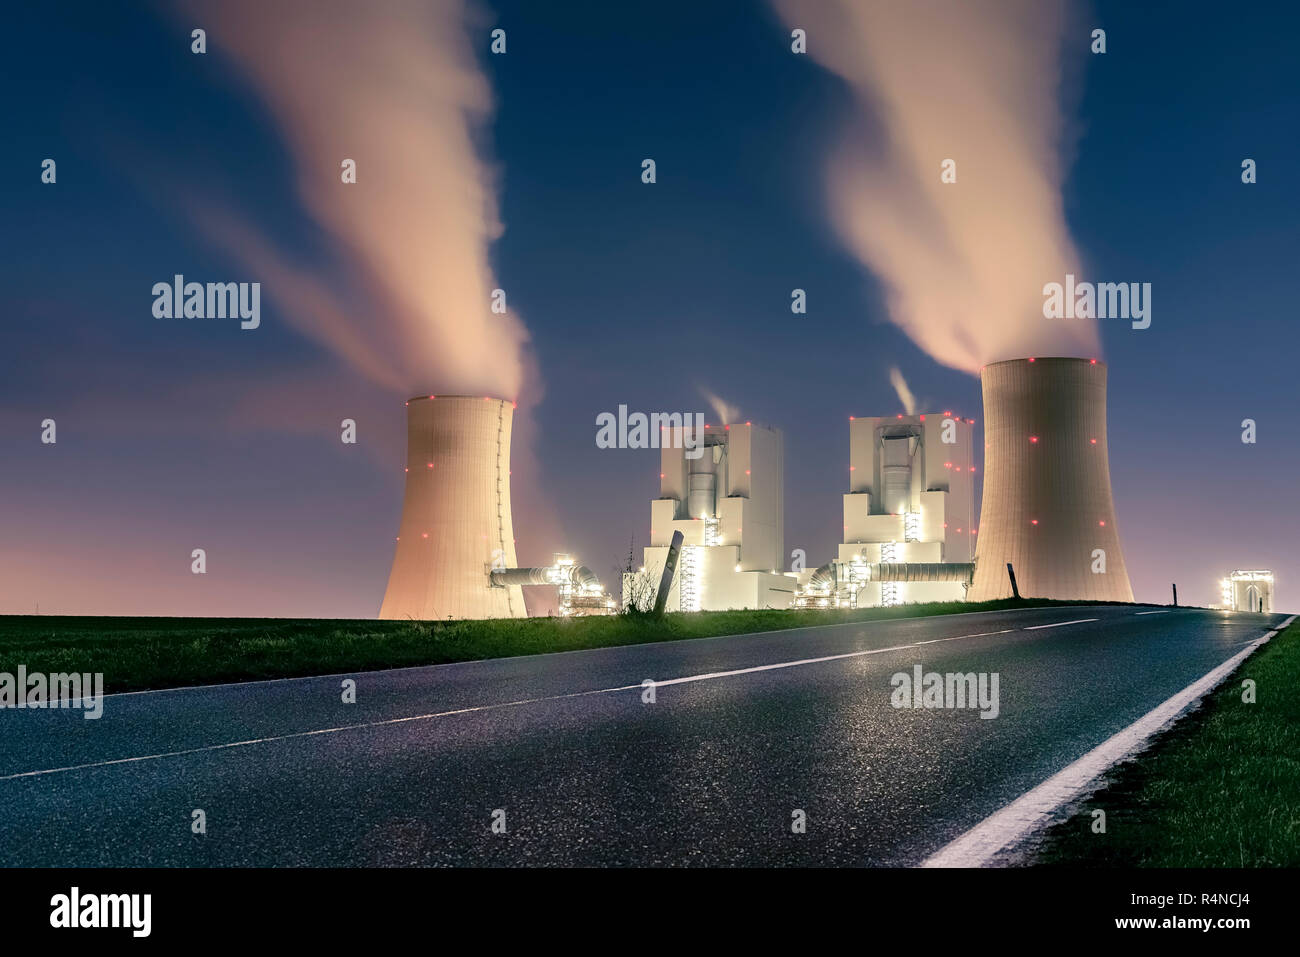 night shot of illuminated lignite power plant with cooling towers Stock Photo